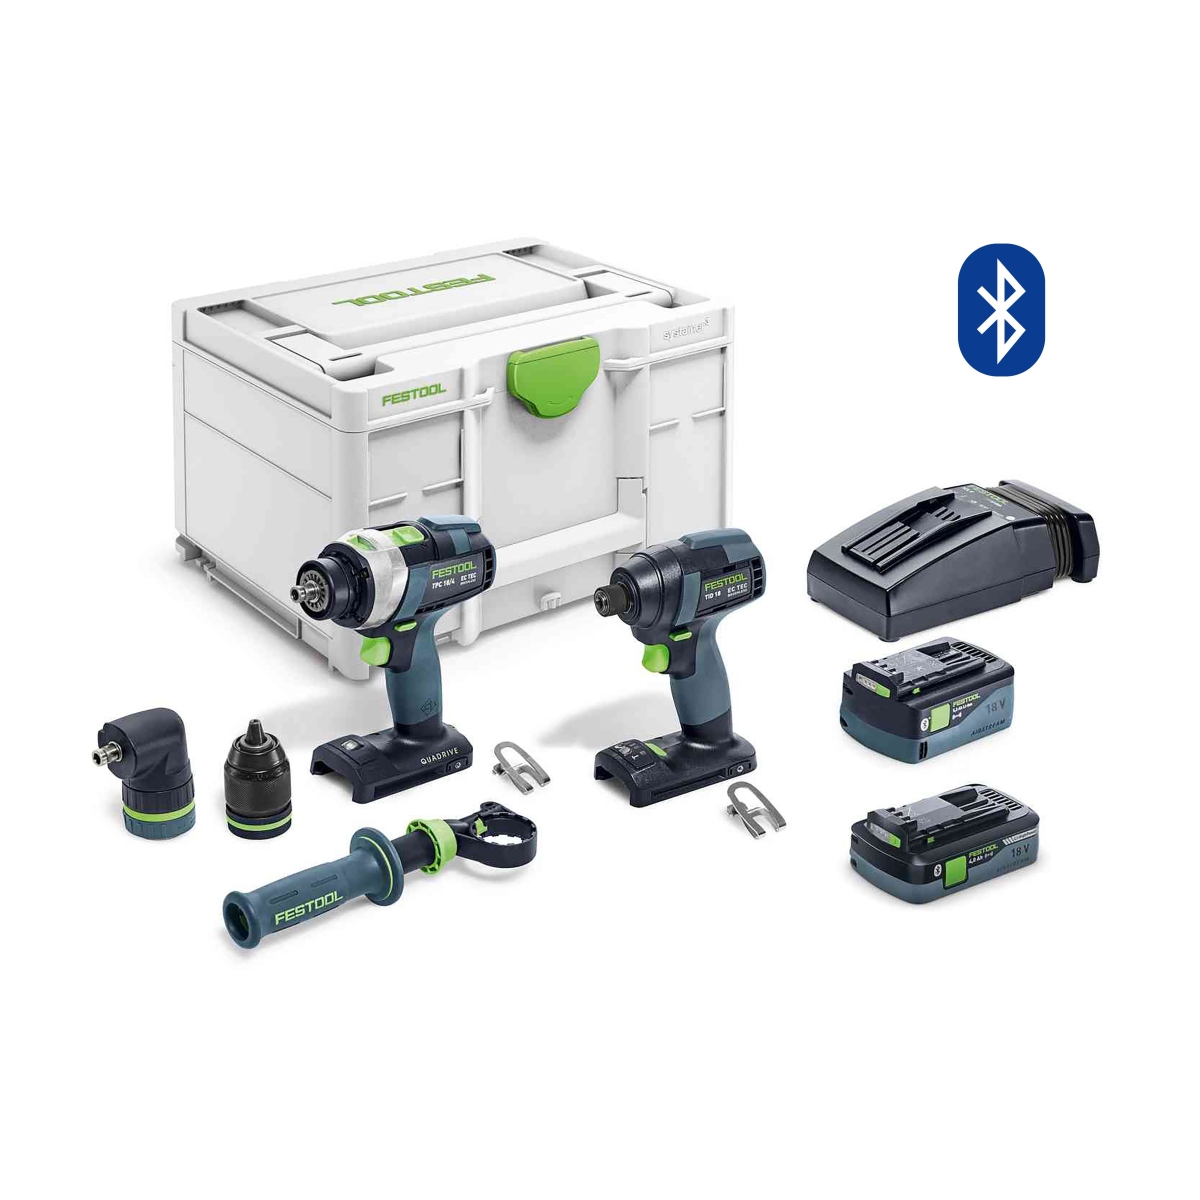 Festool TID/TPC 18v 2-Piece Impact Driver plus 4-Speed Hammer Drill Driver Set in Systainer